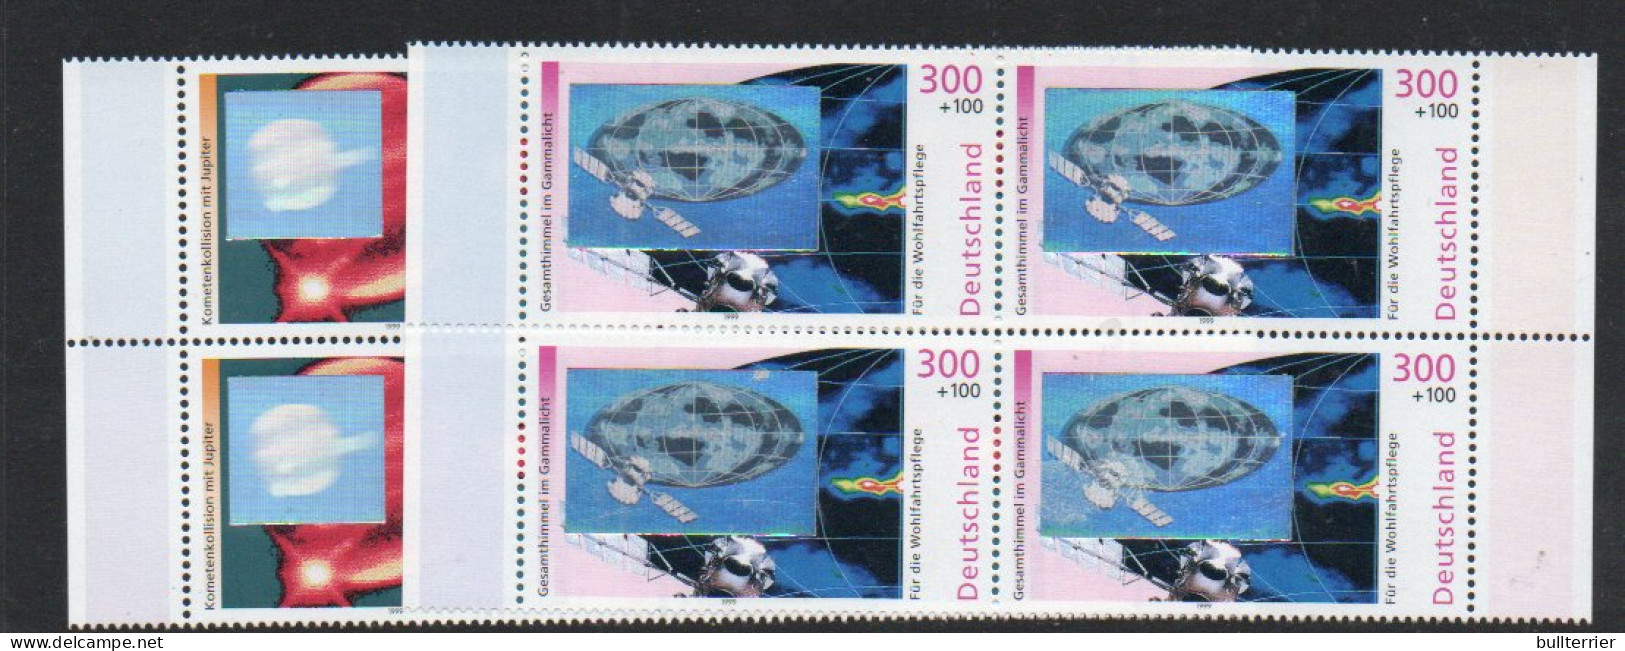 HOLOGRAMS -GERMANY - 1999 - RELIEF 110 PFG AND 300PFG BLOCKS OF 4 MINT NEVER HINGED, SG CAT £37 - Hologrammen